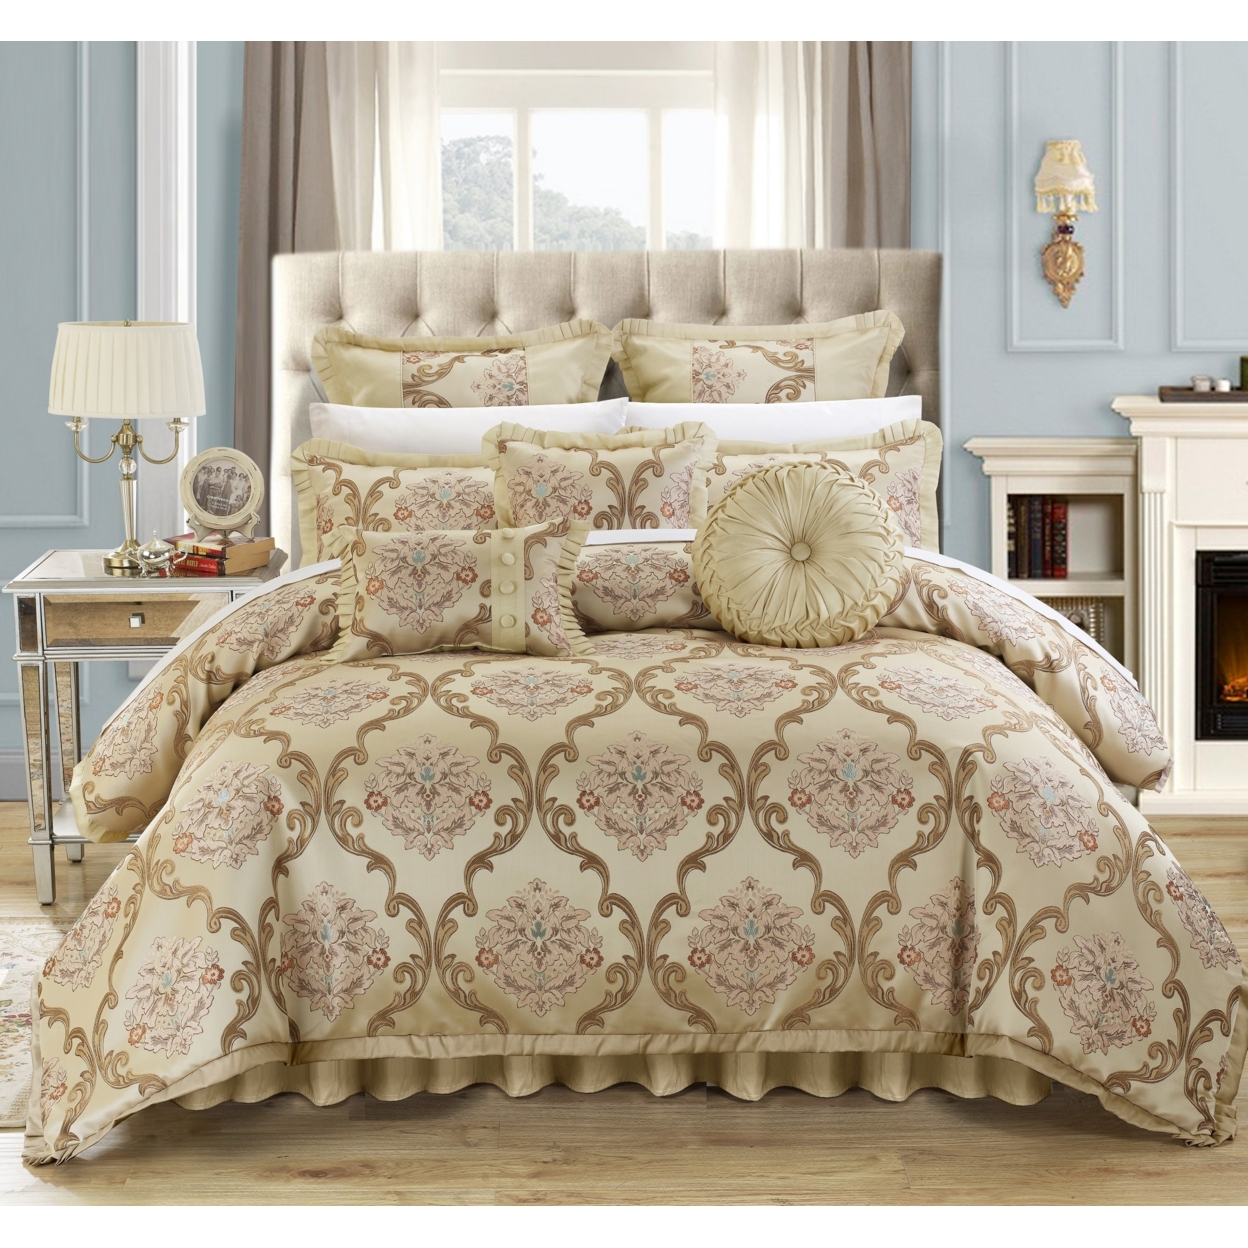 9 Piece Aubrey Decorator Upholstery Quality Jacquard Scroll Fabric Complete Master Bedroom Comforter Set And Pillows Ensemble - Gold, King